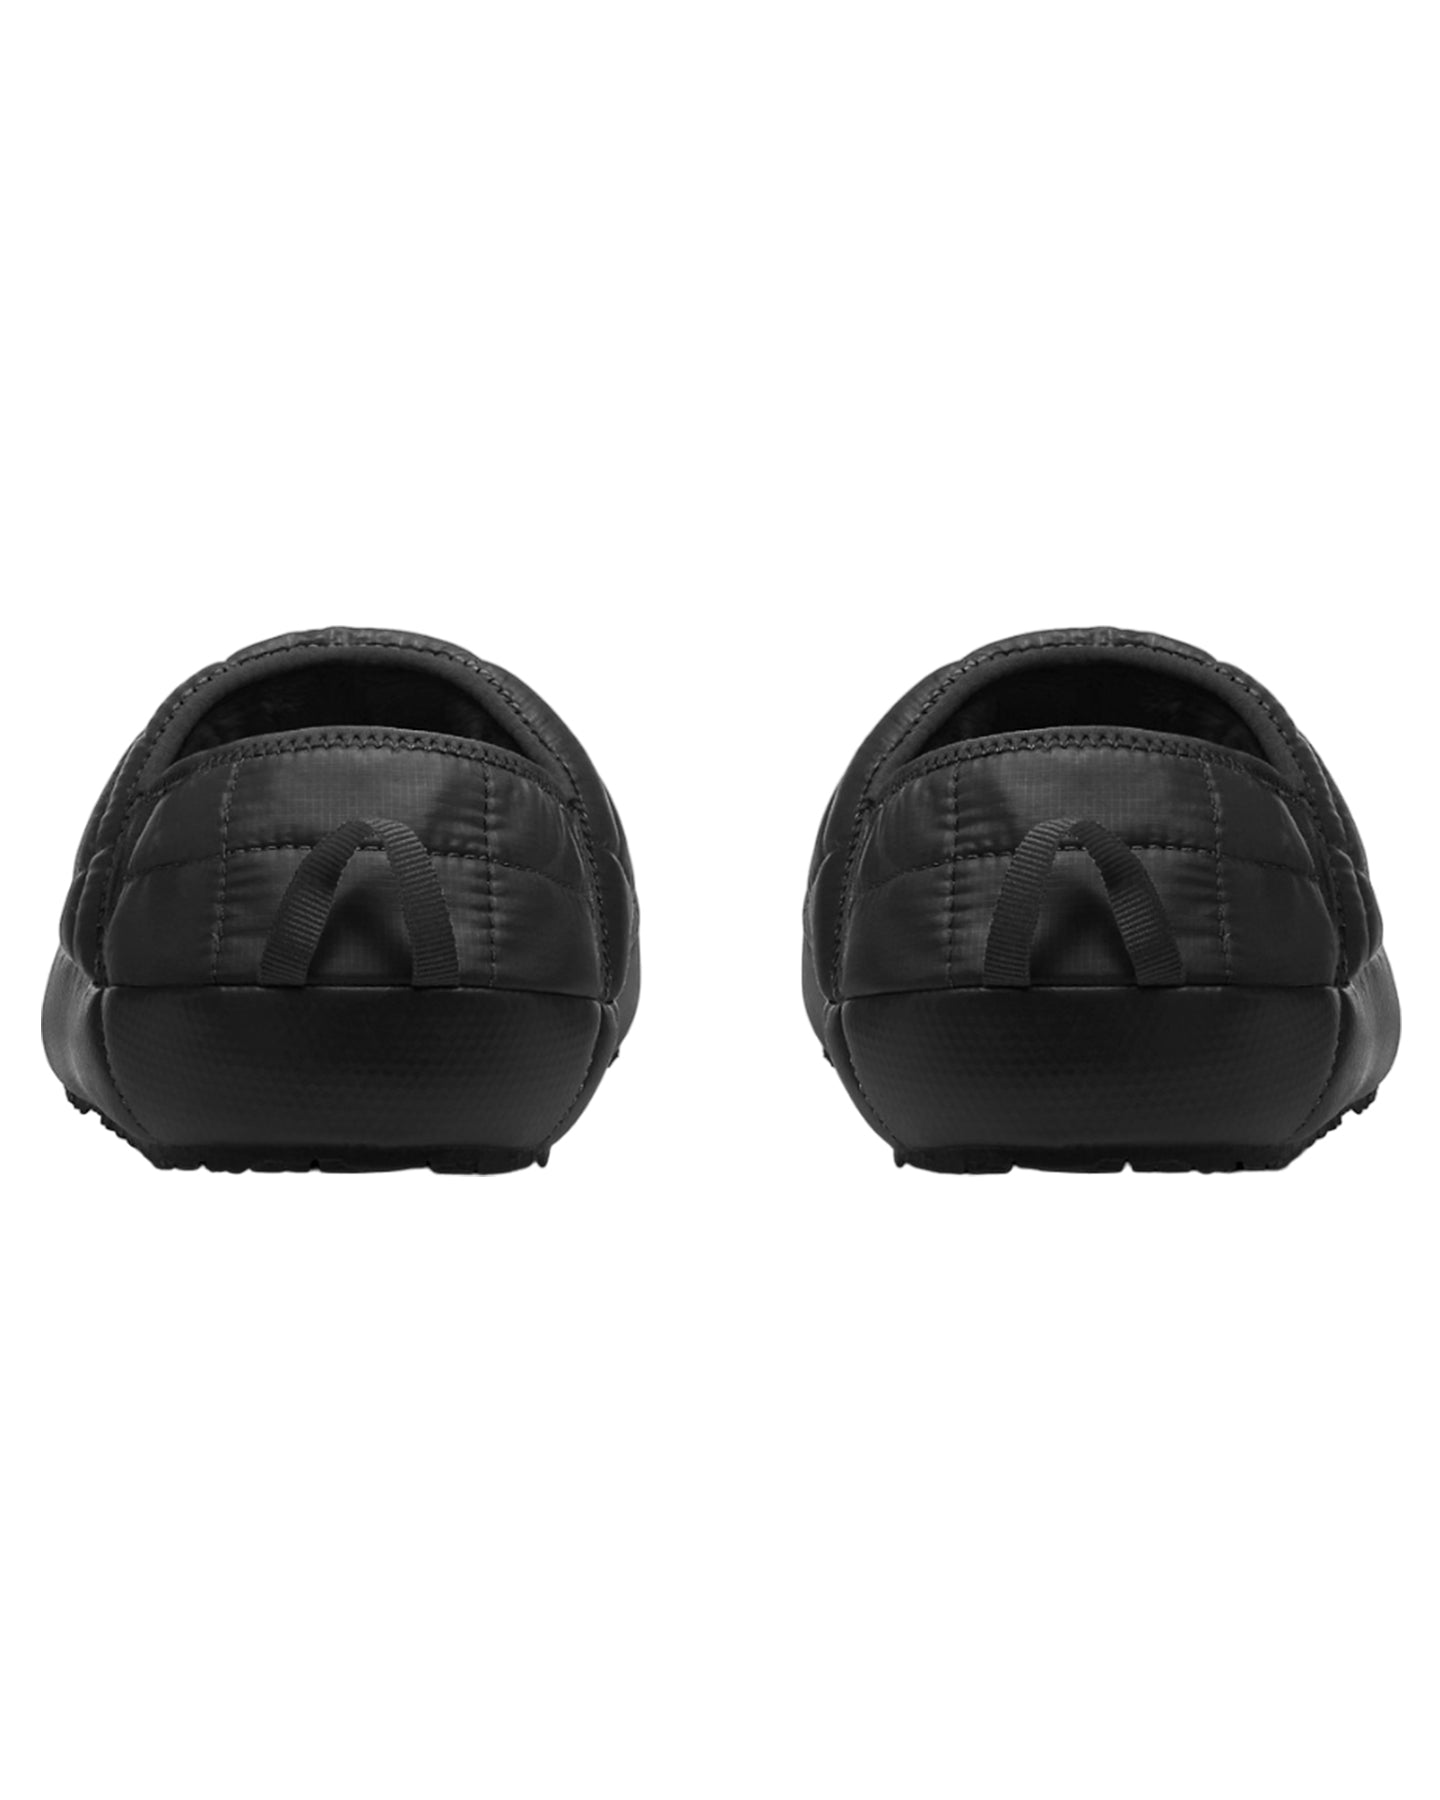 The North Face Women's Thermoball™ Traction Mule V - Tnf Black/Tnf Black Apres Boots - SnowSkiersWarehouse